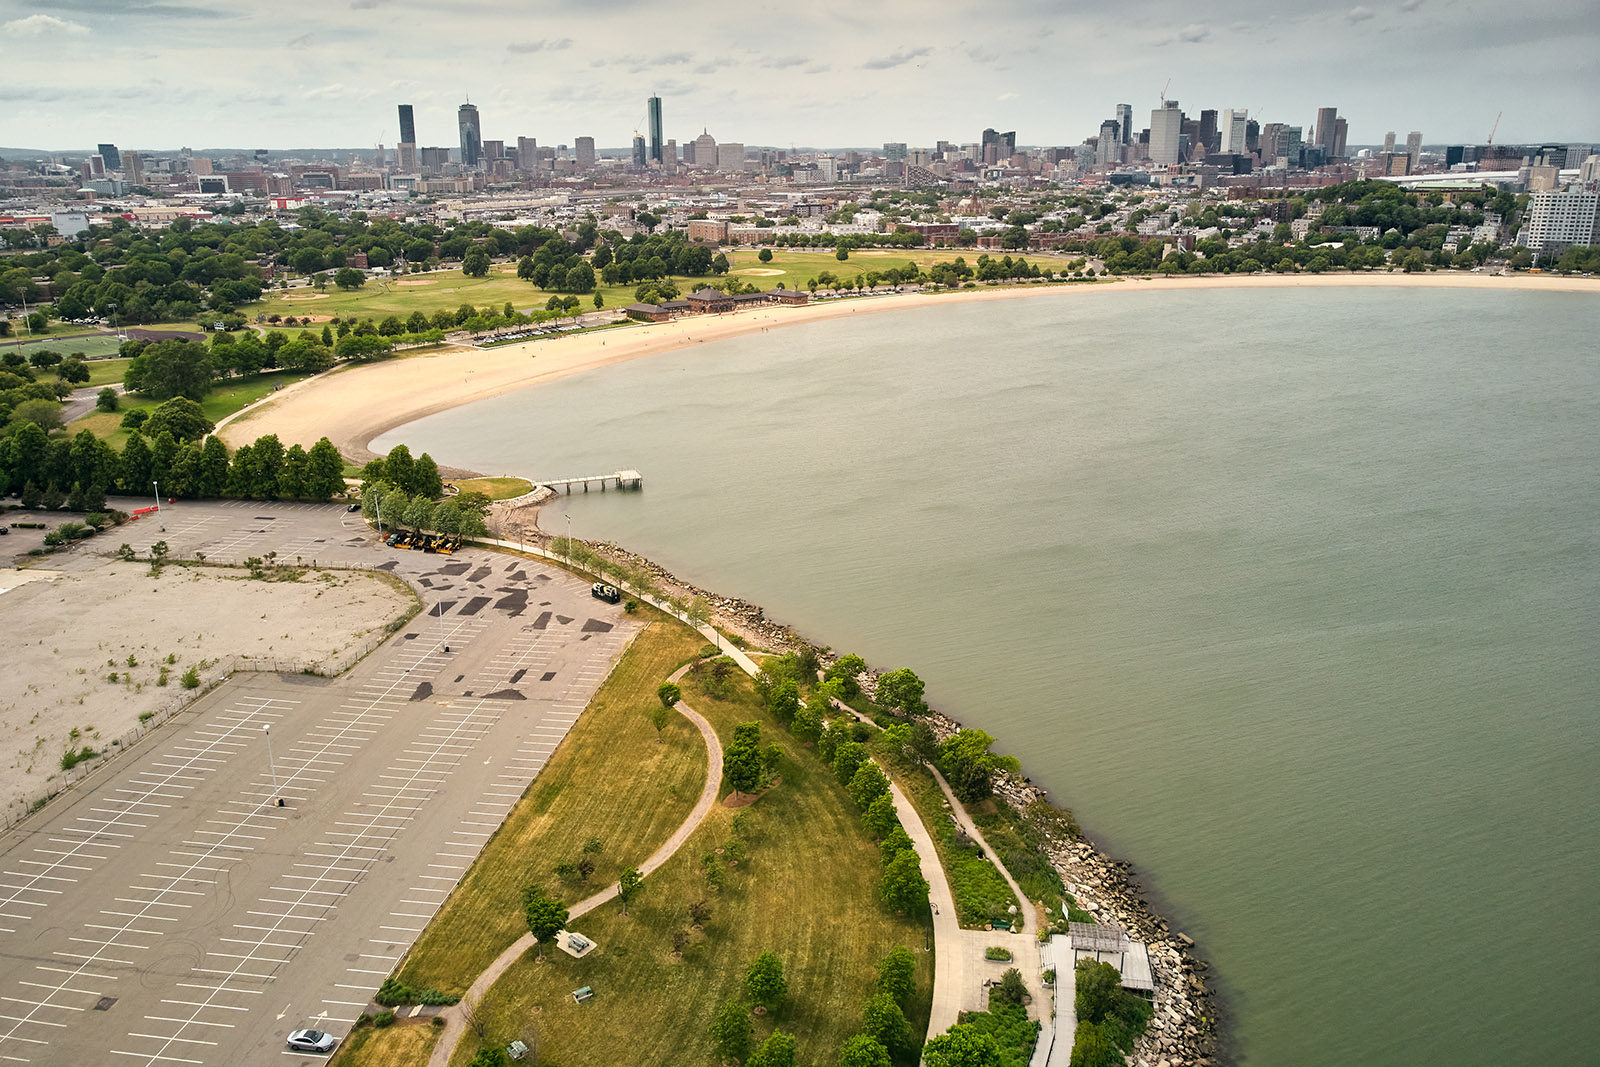 Aerial View of Dorchester Bay with empty parking lot on the left and ocean on the right. Beach and a skyline of Boston in a distance.